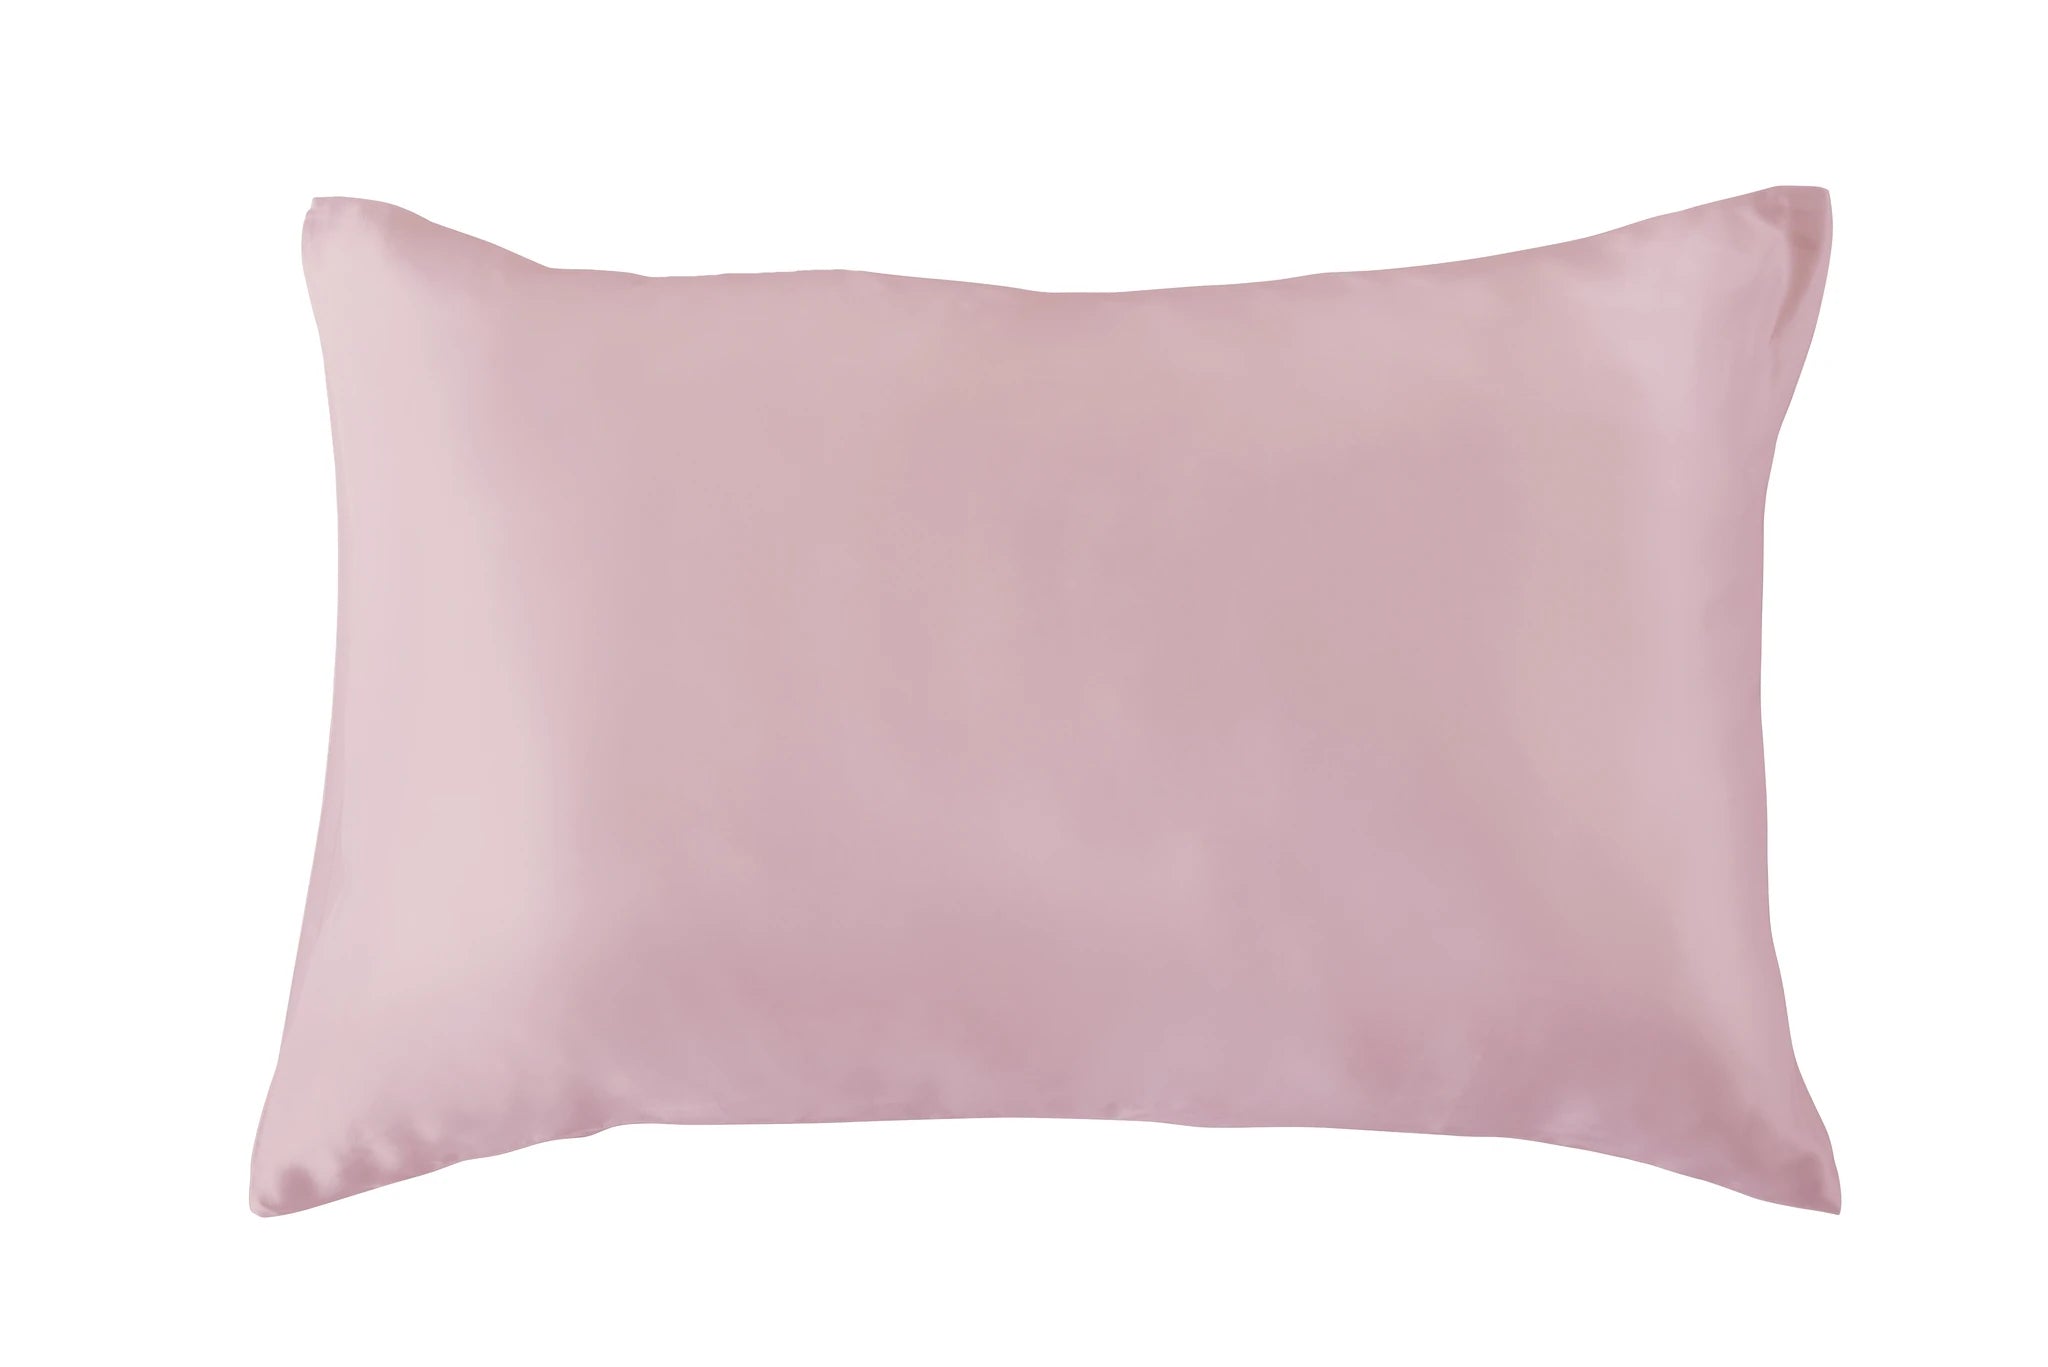 100% Pure Mulberry Silk Pillowcase- color Blush Pink - $85.00